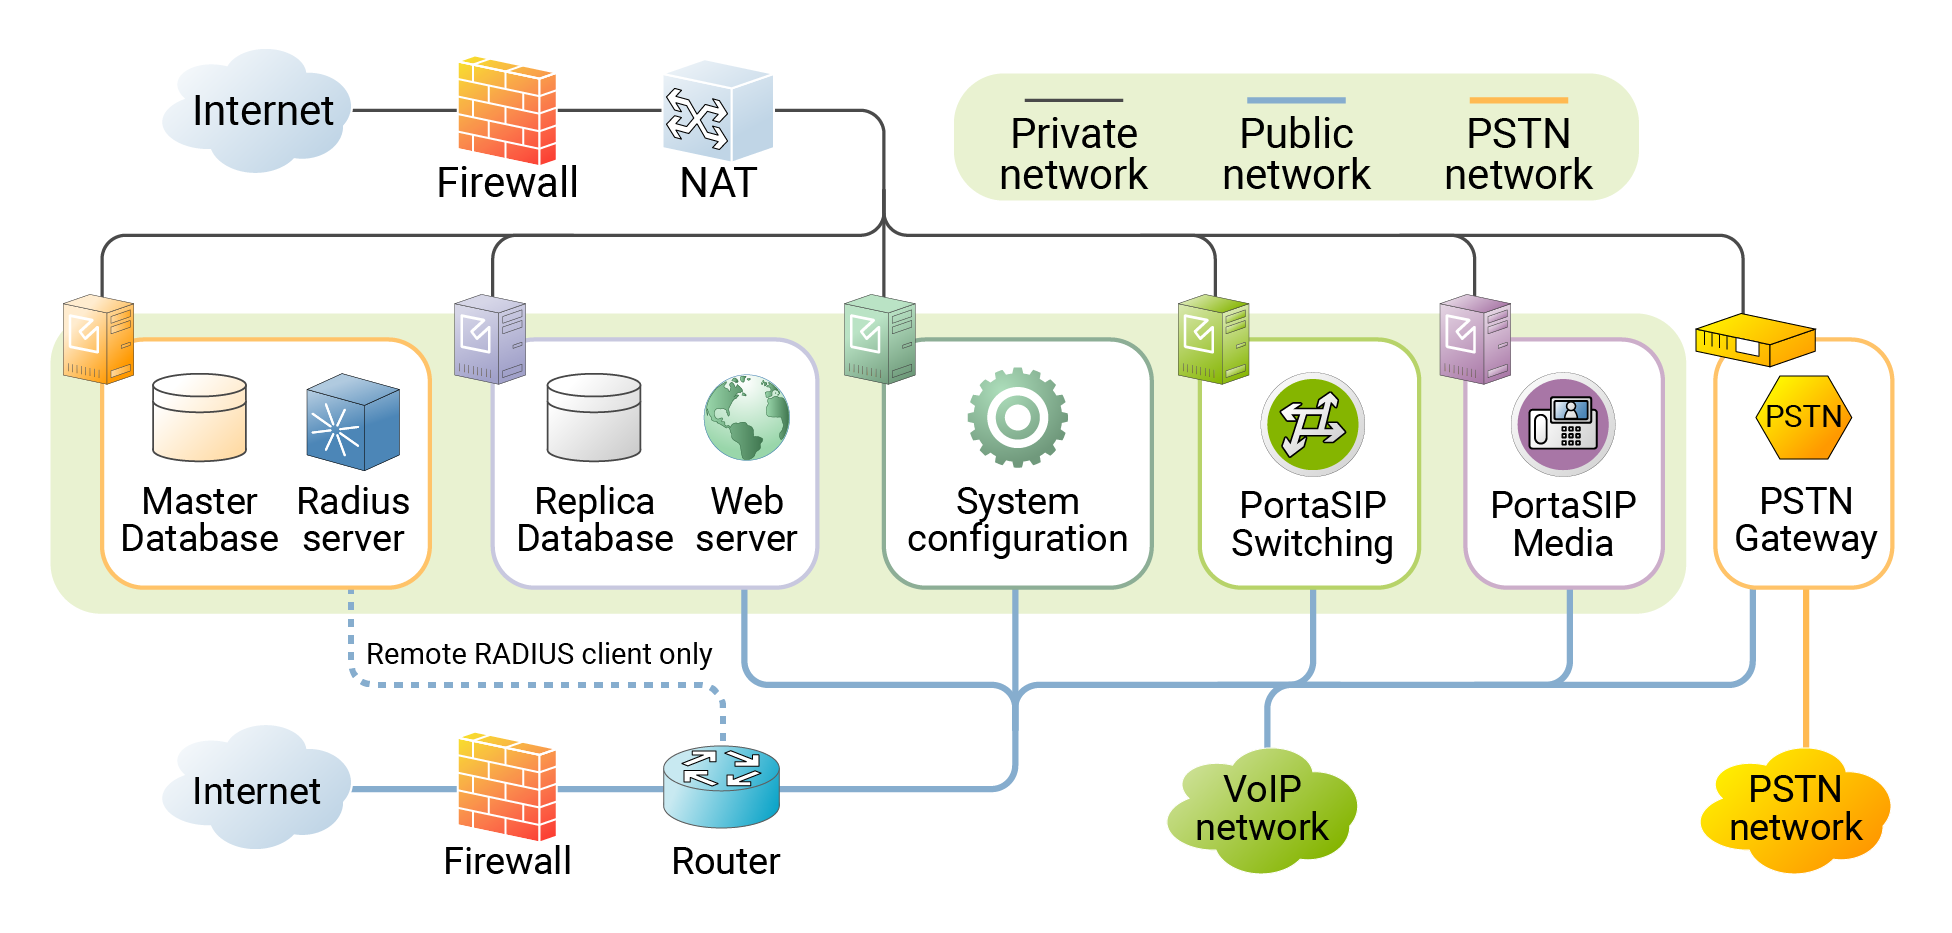 Network configuration for PortaSwitch